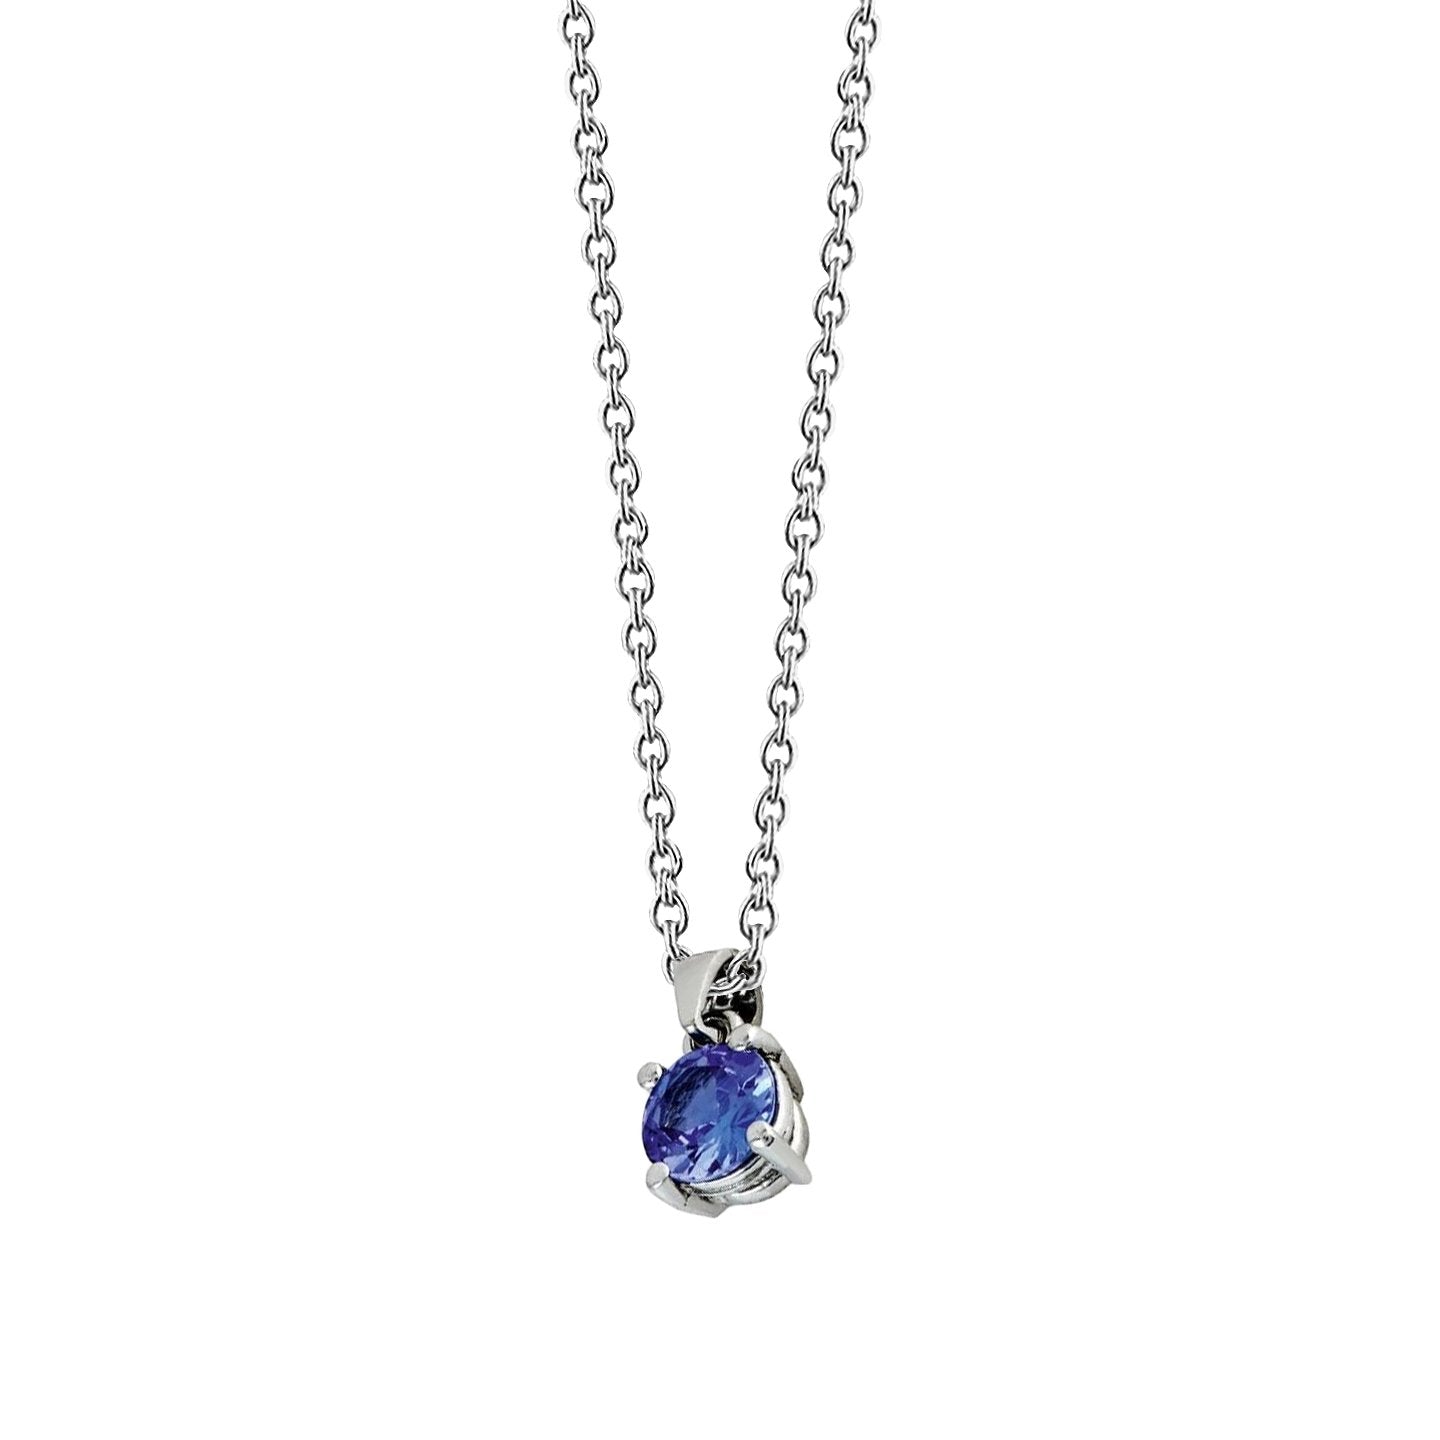 5 Carat Solitaire Tanzanite Pendant Necklace With Chain White Gold - Gemstone Pendant-harrychadent.ca